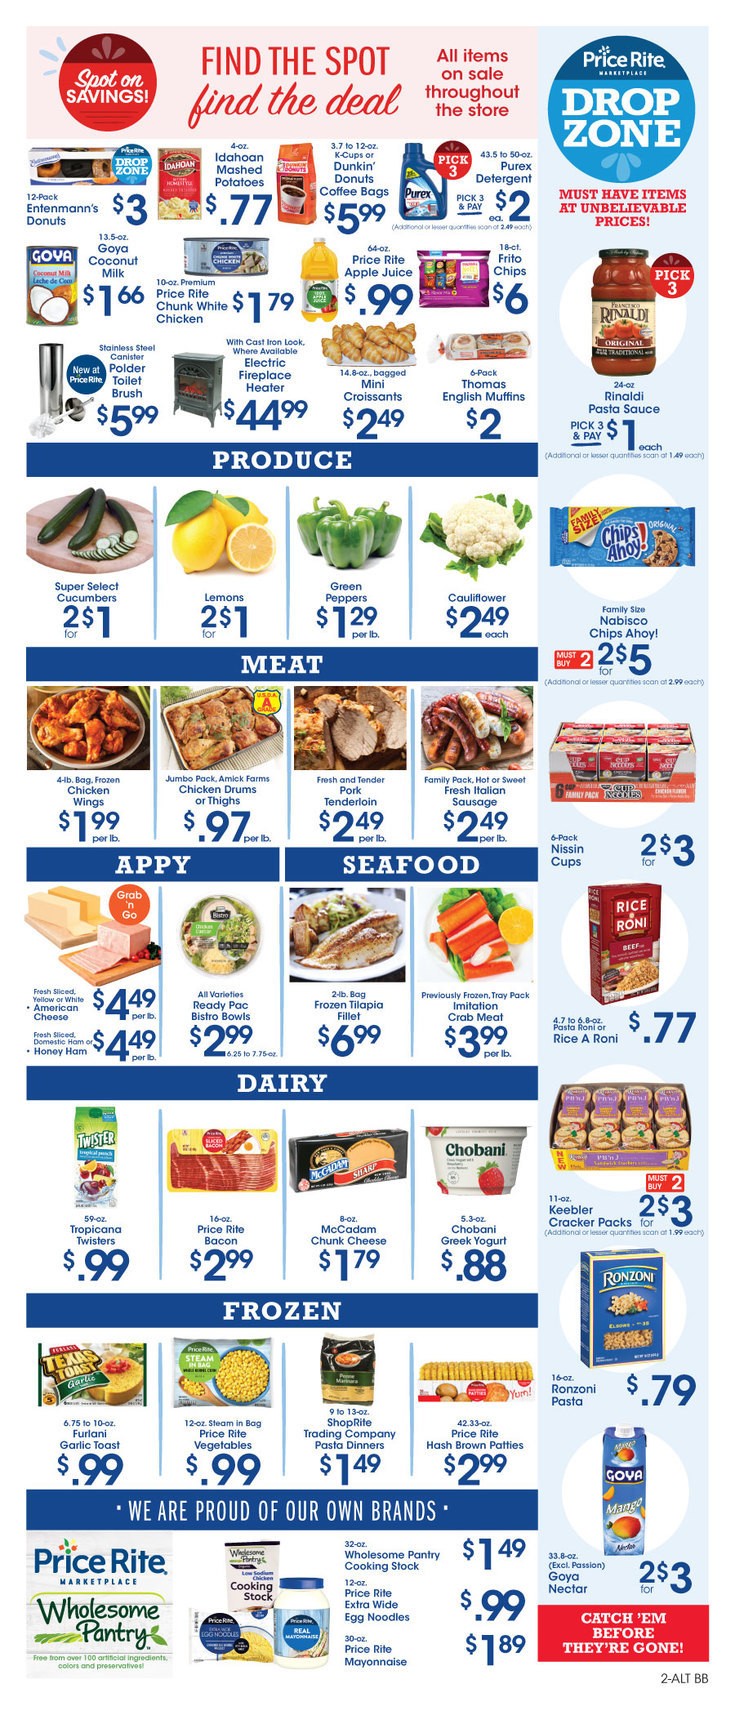 Price Rite Weekly Ad from February 14